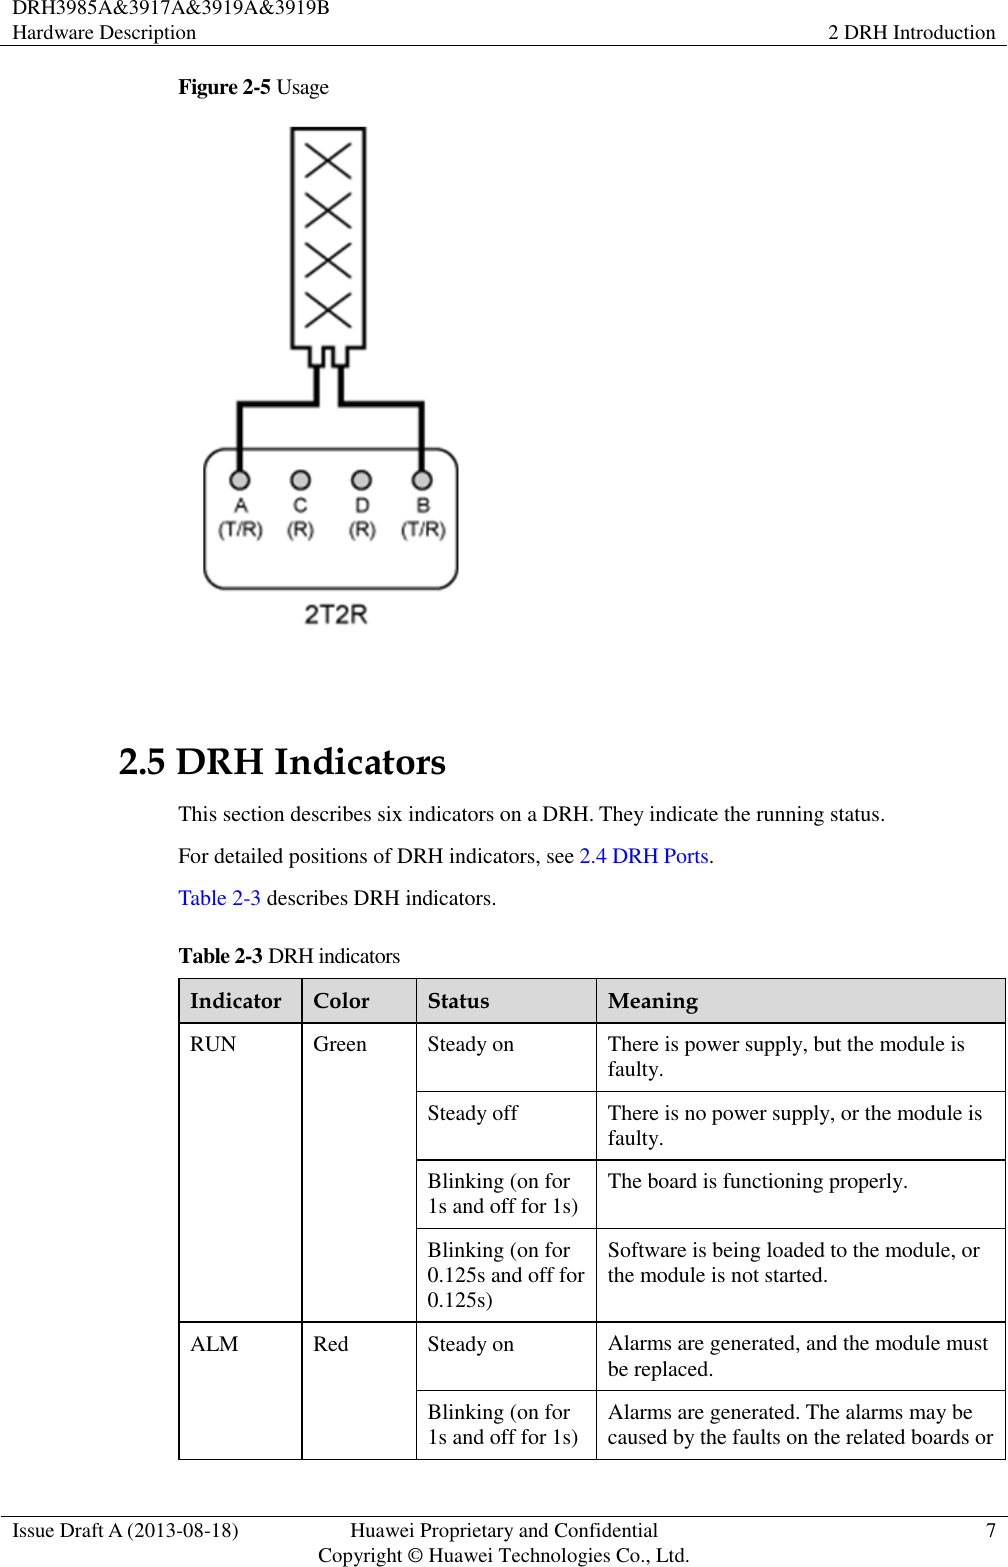 DRH3985A&amp;3917A&amp;3919A&amp;3919B Hardware Description 2 DRH Introduction  Issue Draft A (2013-08-18) Huawei Proprietary and Confidential                                     Copyright © Huawei Technologies Co., Ltd. 7  Figure 2-5 Usage   2.5 DRH Indicators This section describes six indicators on a DRH. They indicate the running status.   For detailed positions of DRH indicators, see 2.4 DRH Ports. Table 2-3 describes DRH indicators. Table 2-3 DRH indicators Indicator Color Status Meaning RUN Green Steady on There is power supply, but the module is faulty. Steady off There is no power supply, or the module is faulty. Blinking (on for 1s and off for 1s) The board is functioning properly. Blinking (on for 0.125s and off for 0.125s) Software is being loaded to the module, or the module is not started. ALM Red Steady on Alarms are generated, and the module must be replaced. Blinking (on for 1s and off for 1s) Alarms are generated. The alarms may be caused by the faults on the related boards or 